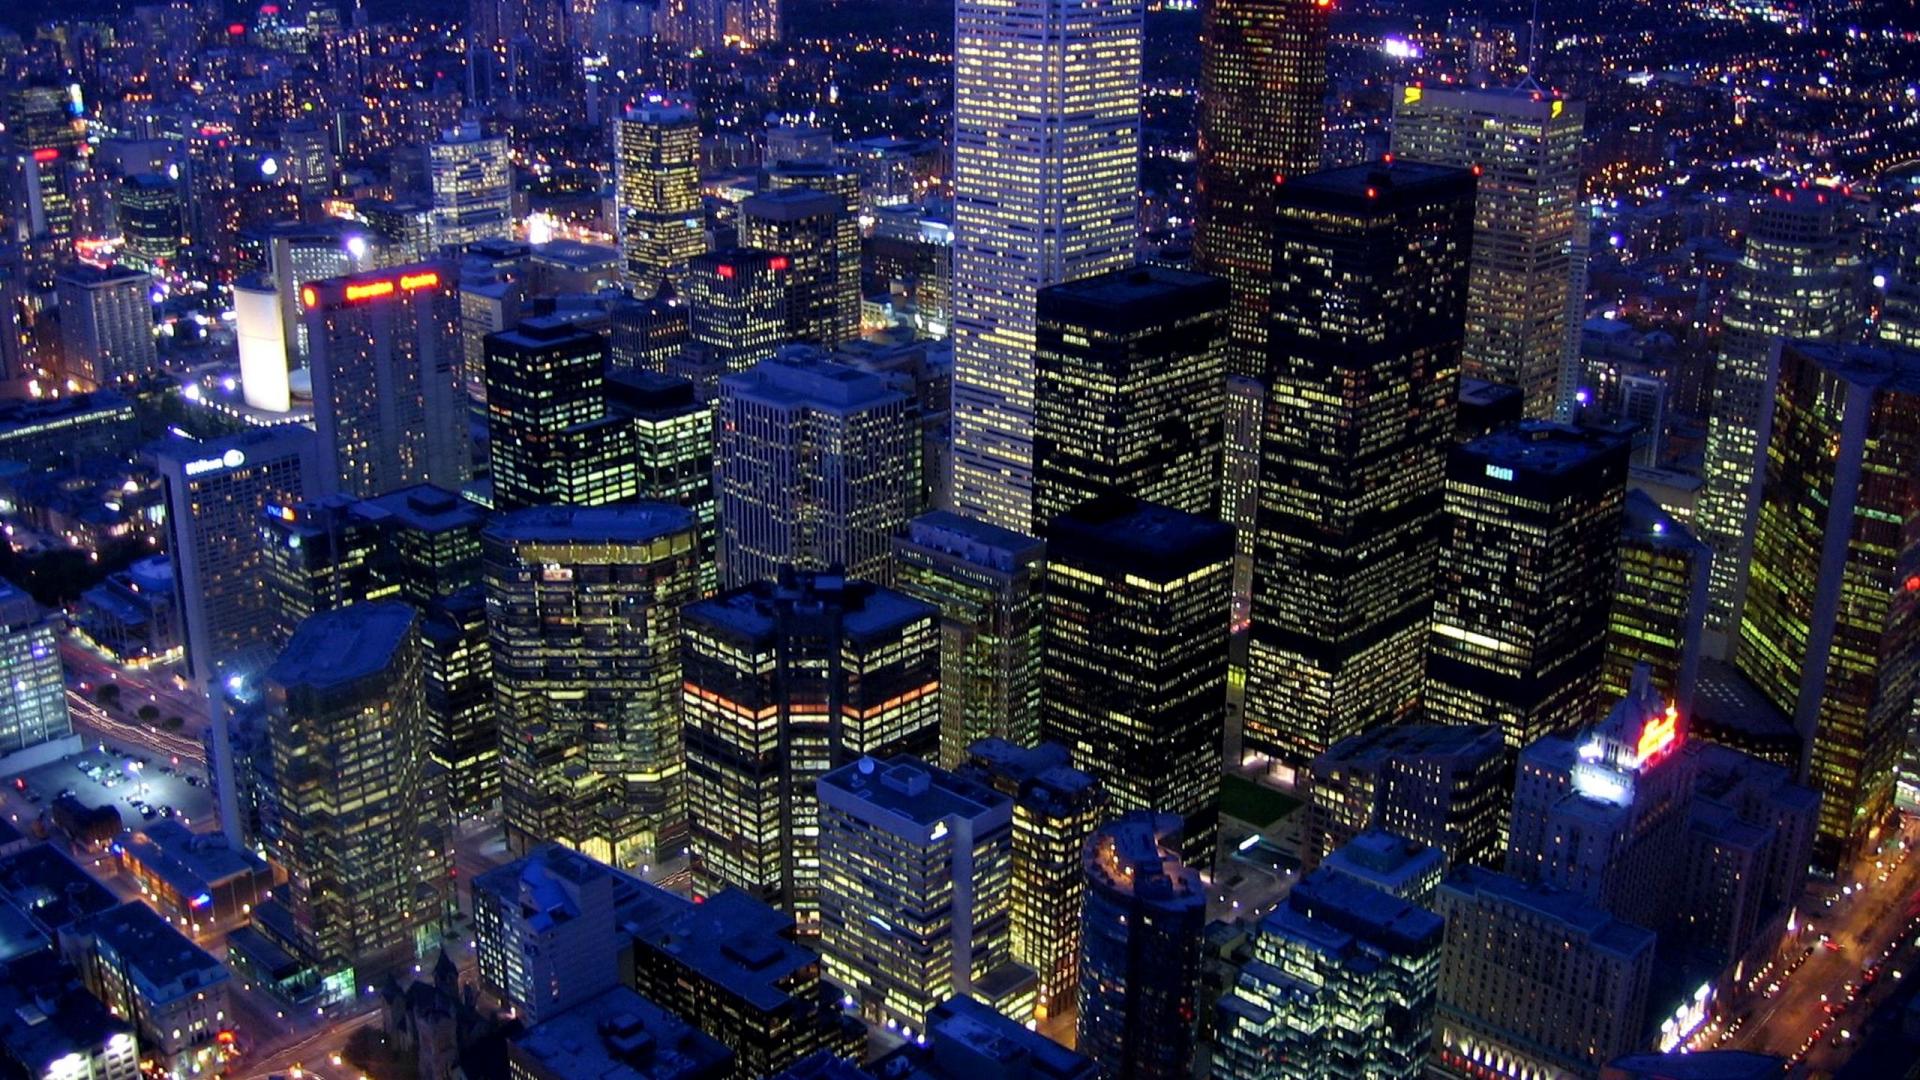 view from cn tower in toronto at nightjpg 1920x1080